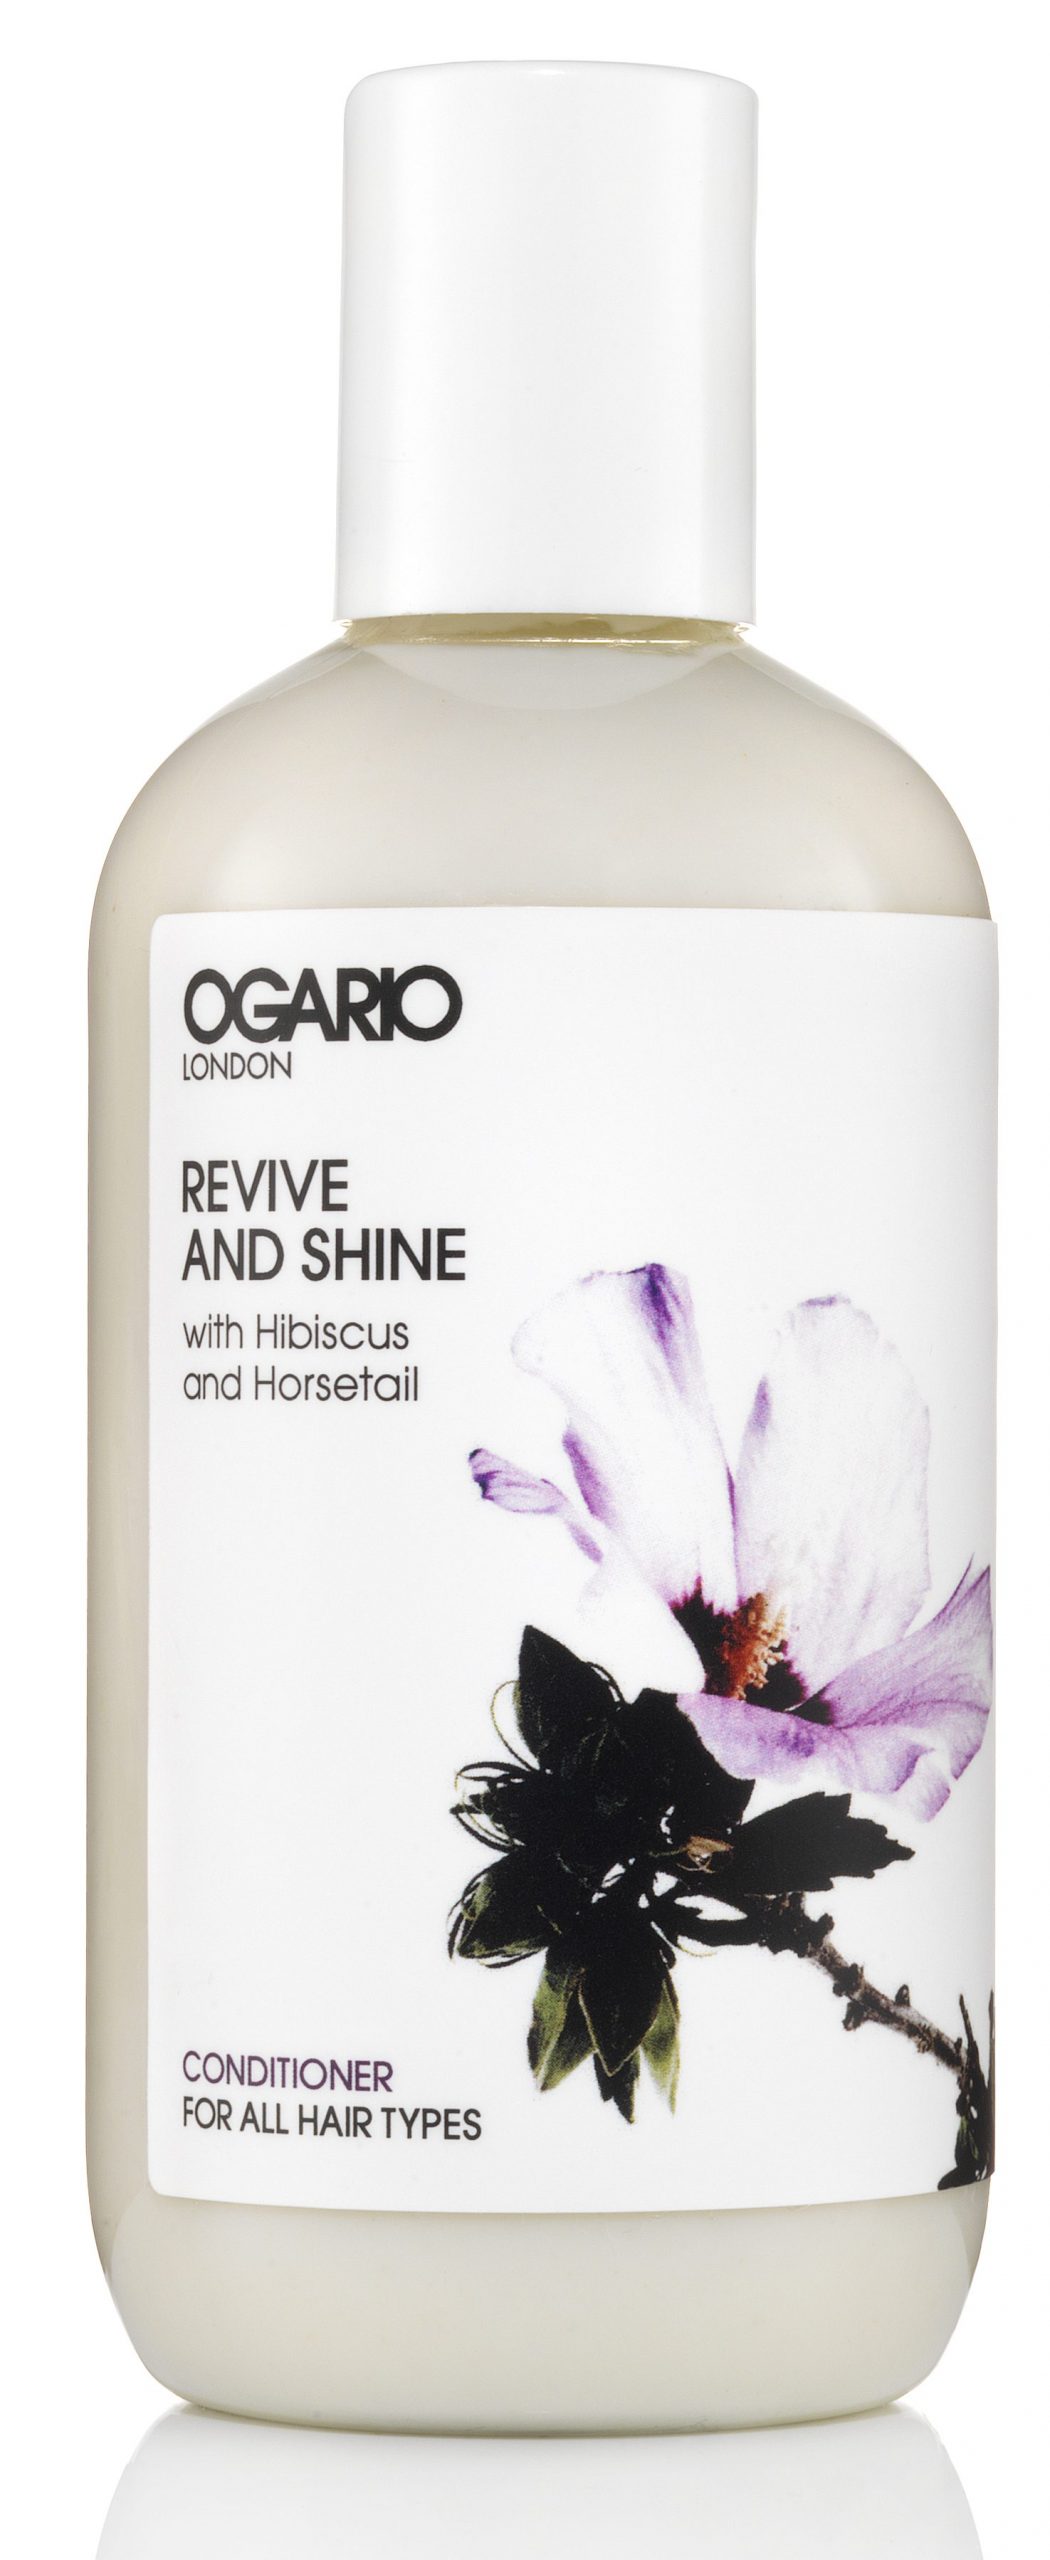 bottle of ogario revive and shine conditioner on white background